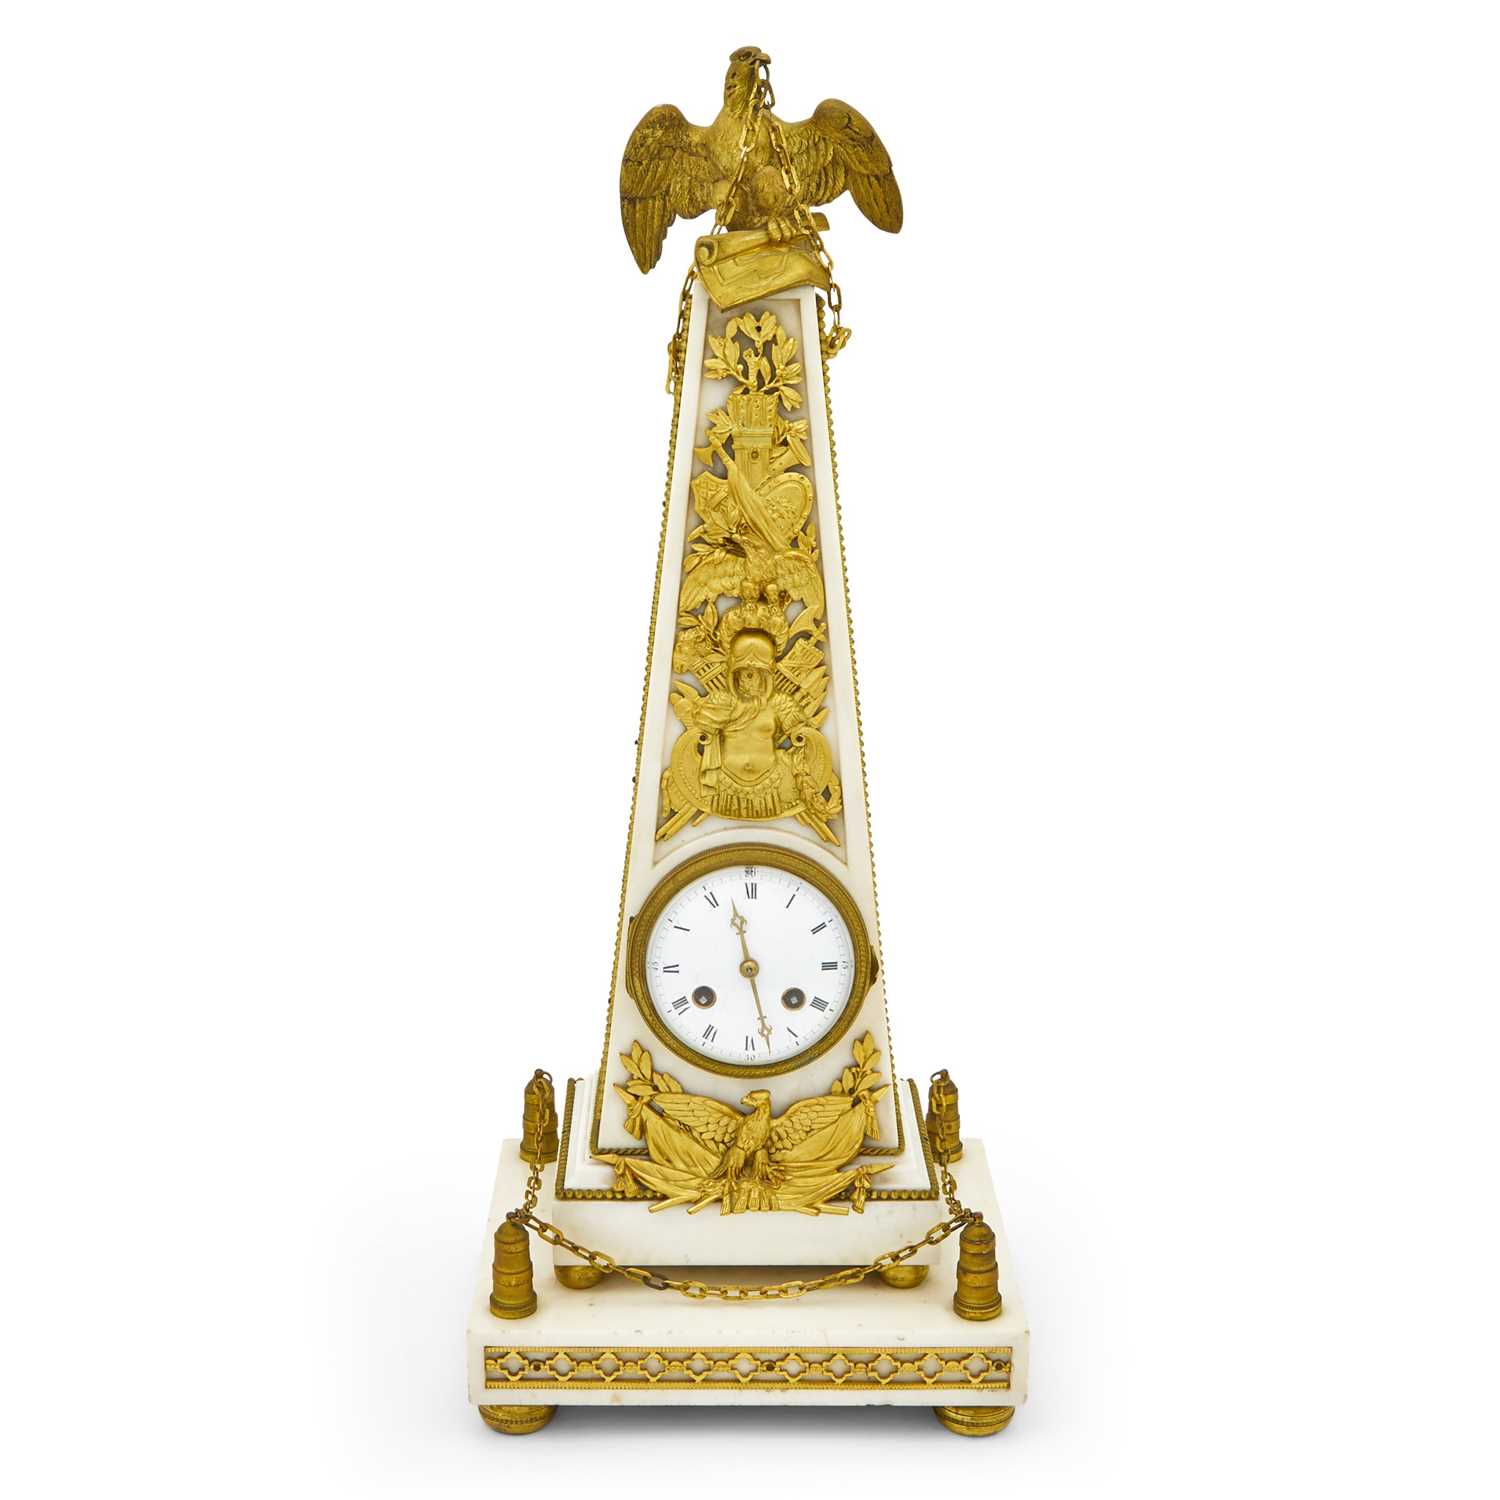 Lot 359 - Empire Style Gilt-Bronze and Marble Obelisk-Form Mantel Clock